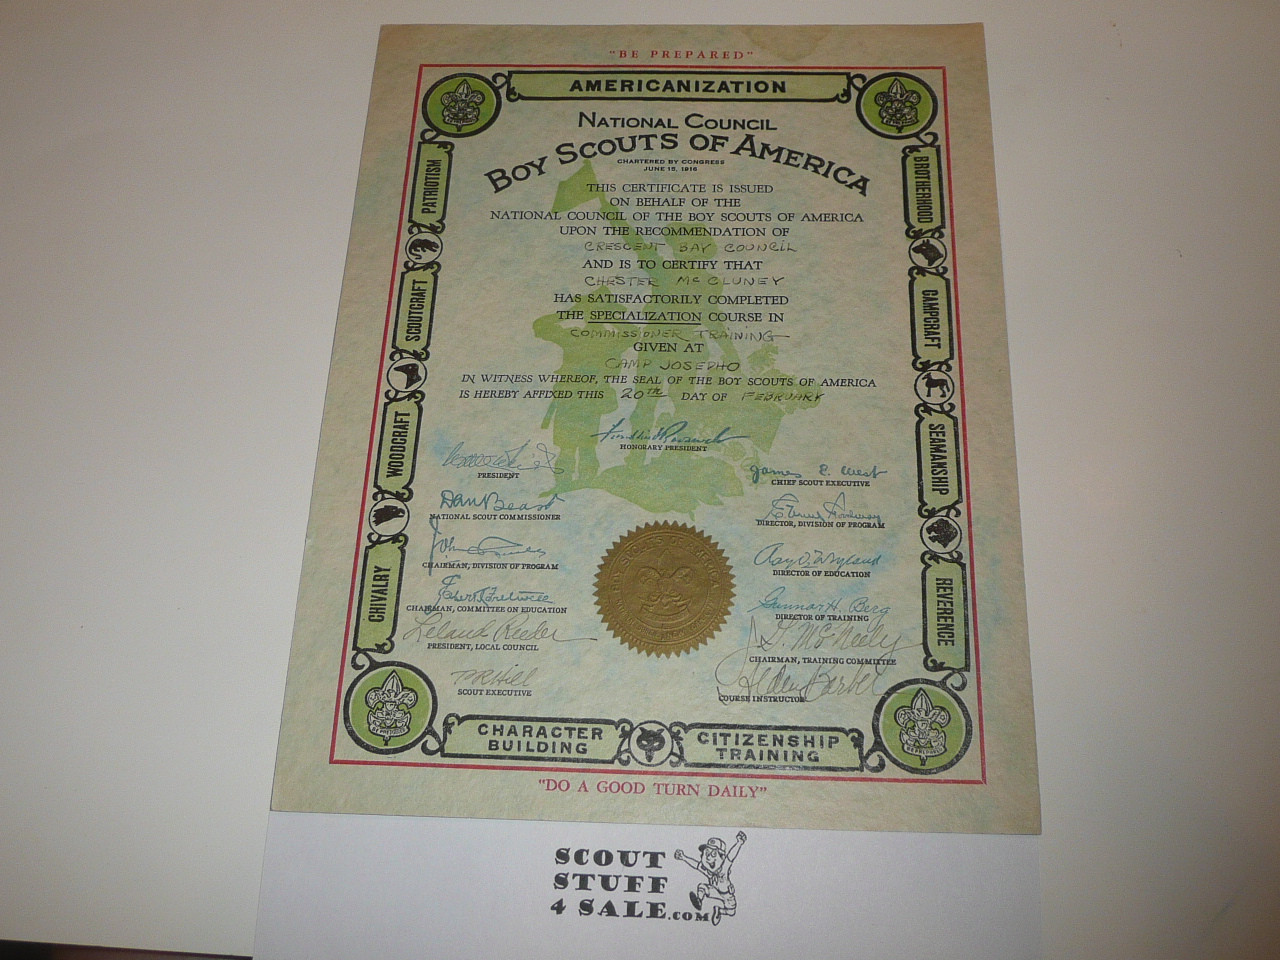 1940's Specialization Course in Commissioner Service Training Certificate, Presented, Camp Josepho